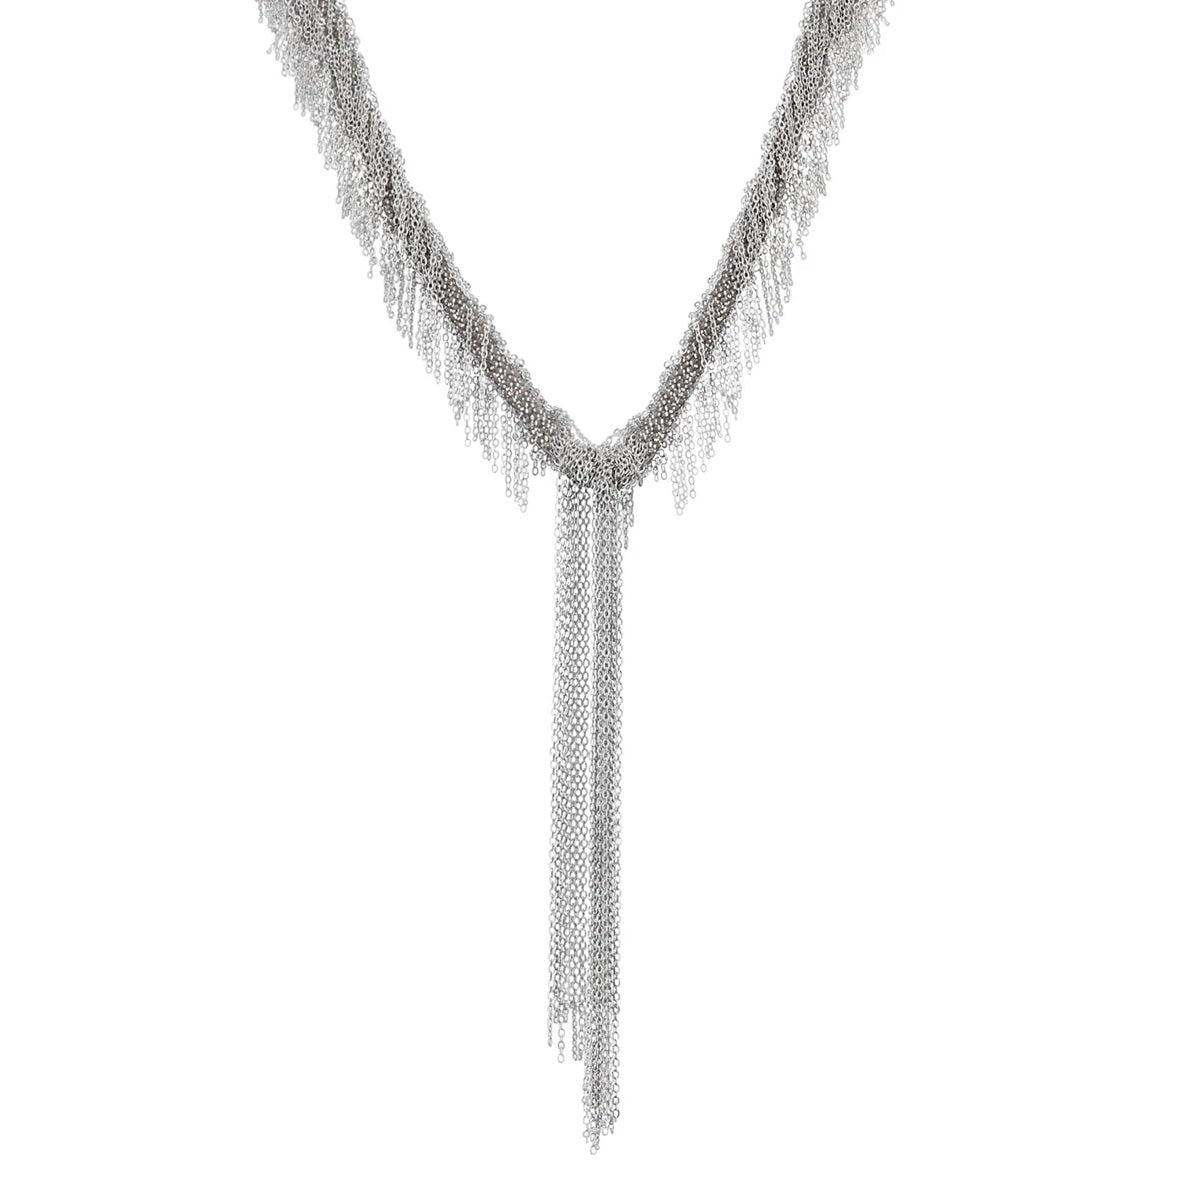 White Bronze &amp; Grey Silk Woven &quot;Fringe&quot; Necklace with Chain Drop - Peridot Fine Jewelry - Marie Laure Chamorel